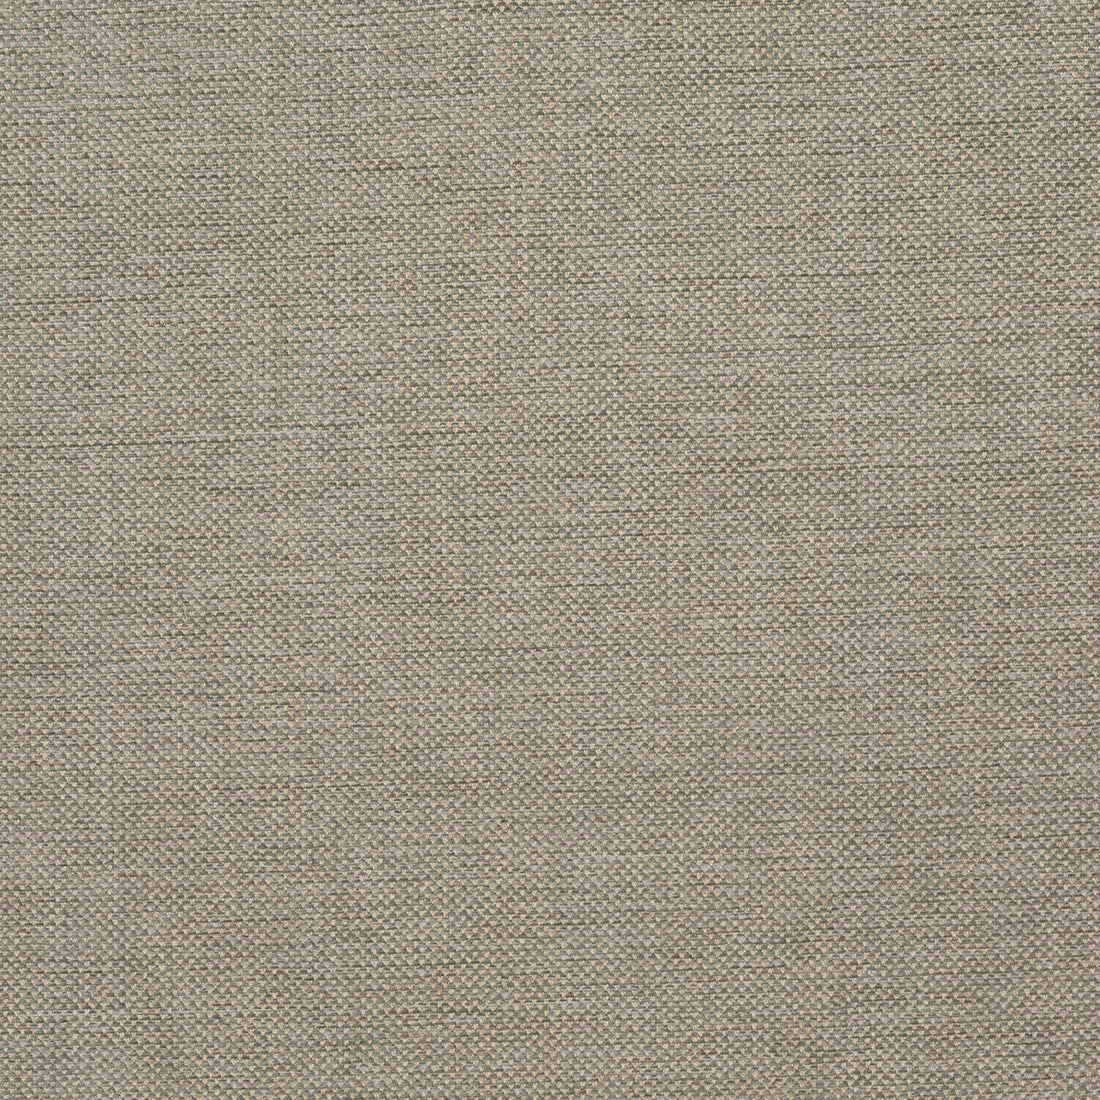 Webster fabric in mist color - pattern BFC-3713.113.0 - by Lee Jofa in the Blithfield Eden collection